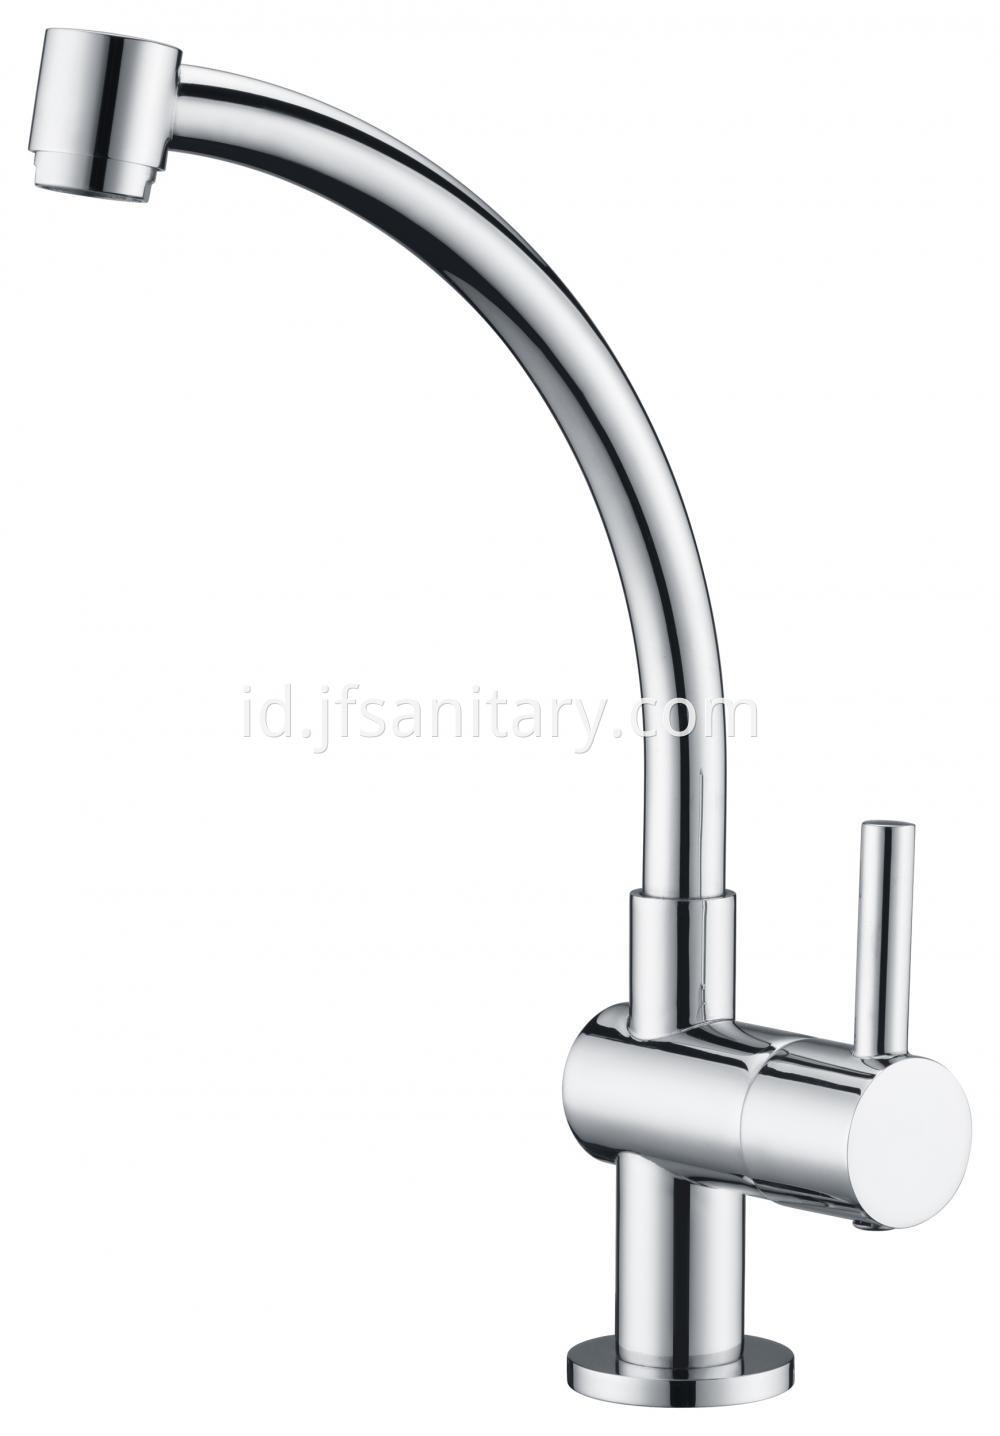 sink drinking water faucet